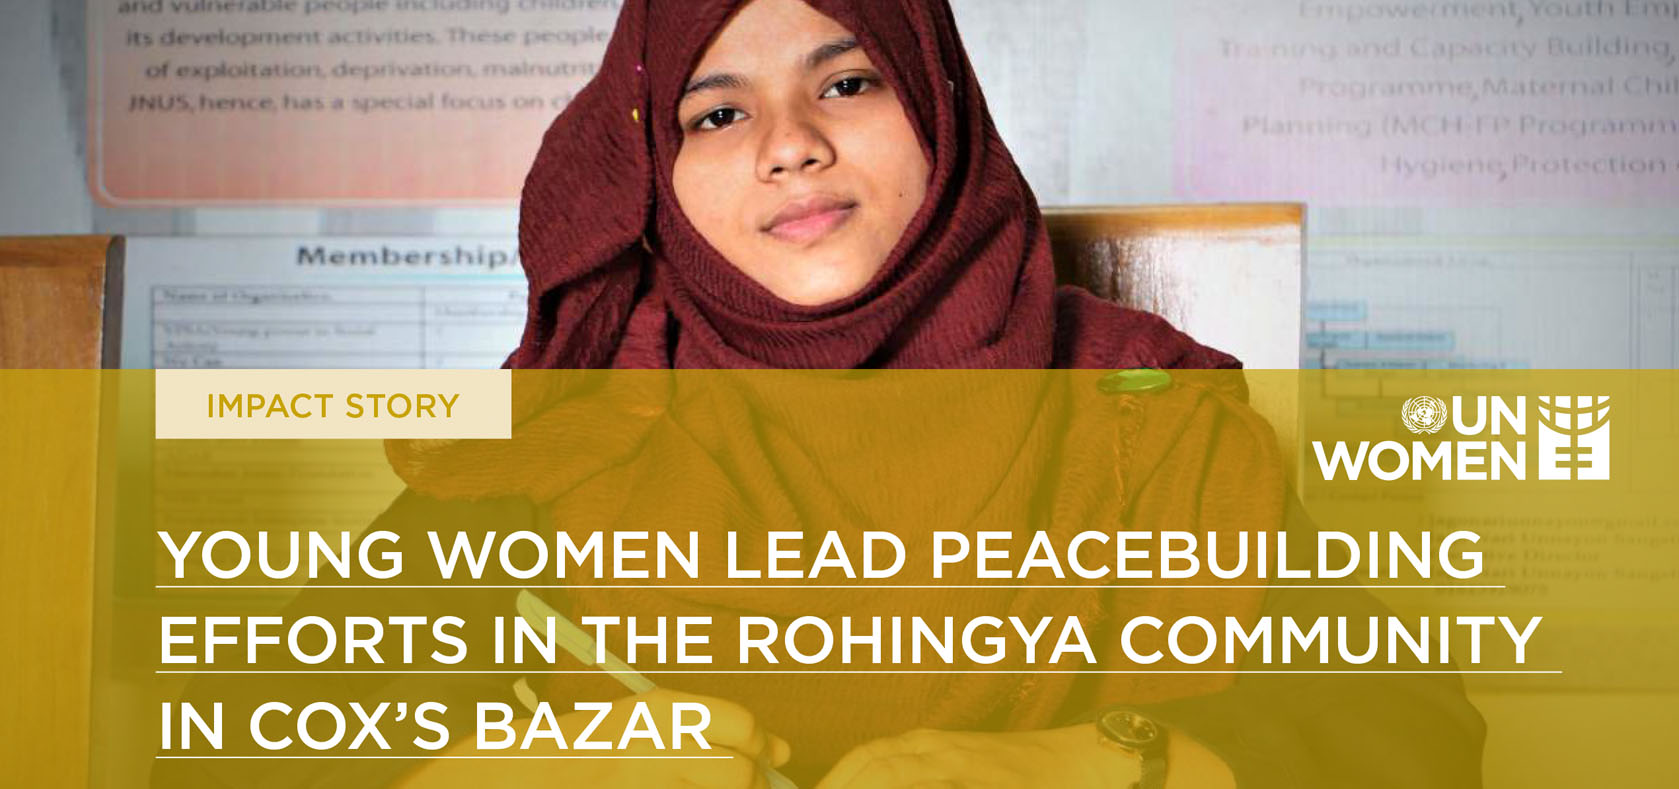 Young women lead peacebuilding efforts in the Rohingya community in Cox’s Bazar (WPS Series, September 2021)